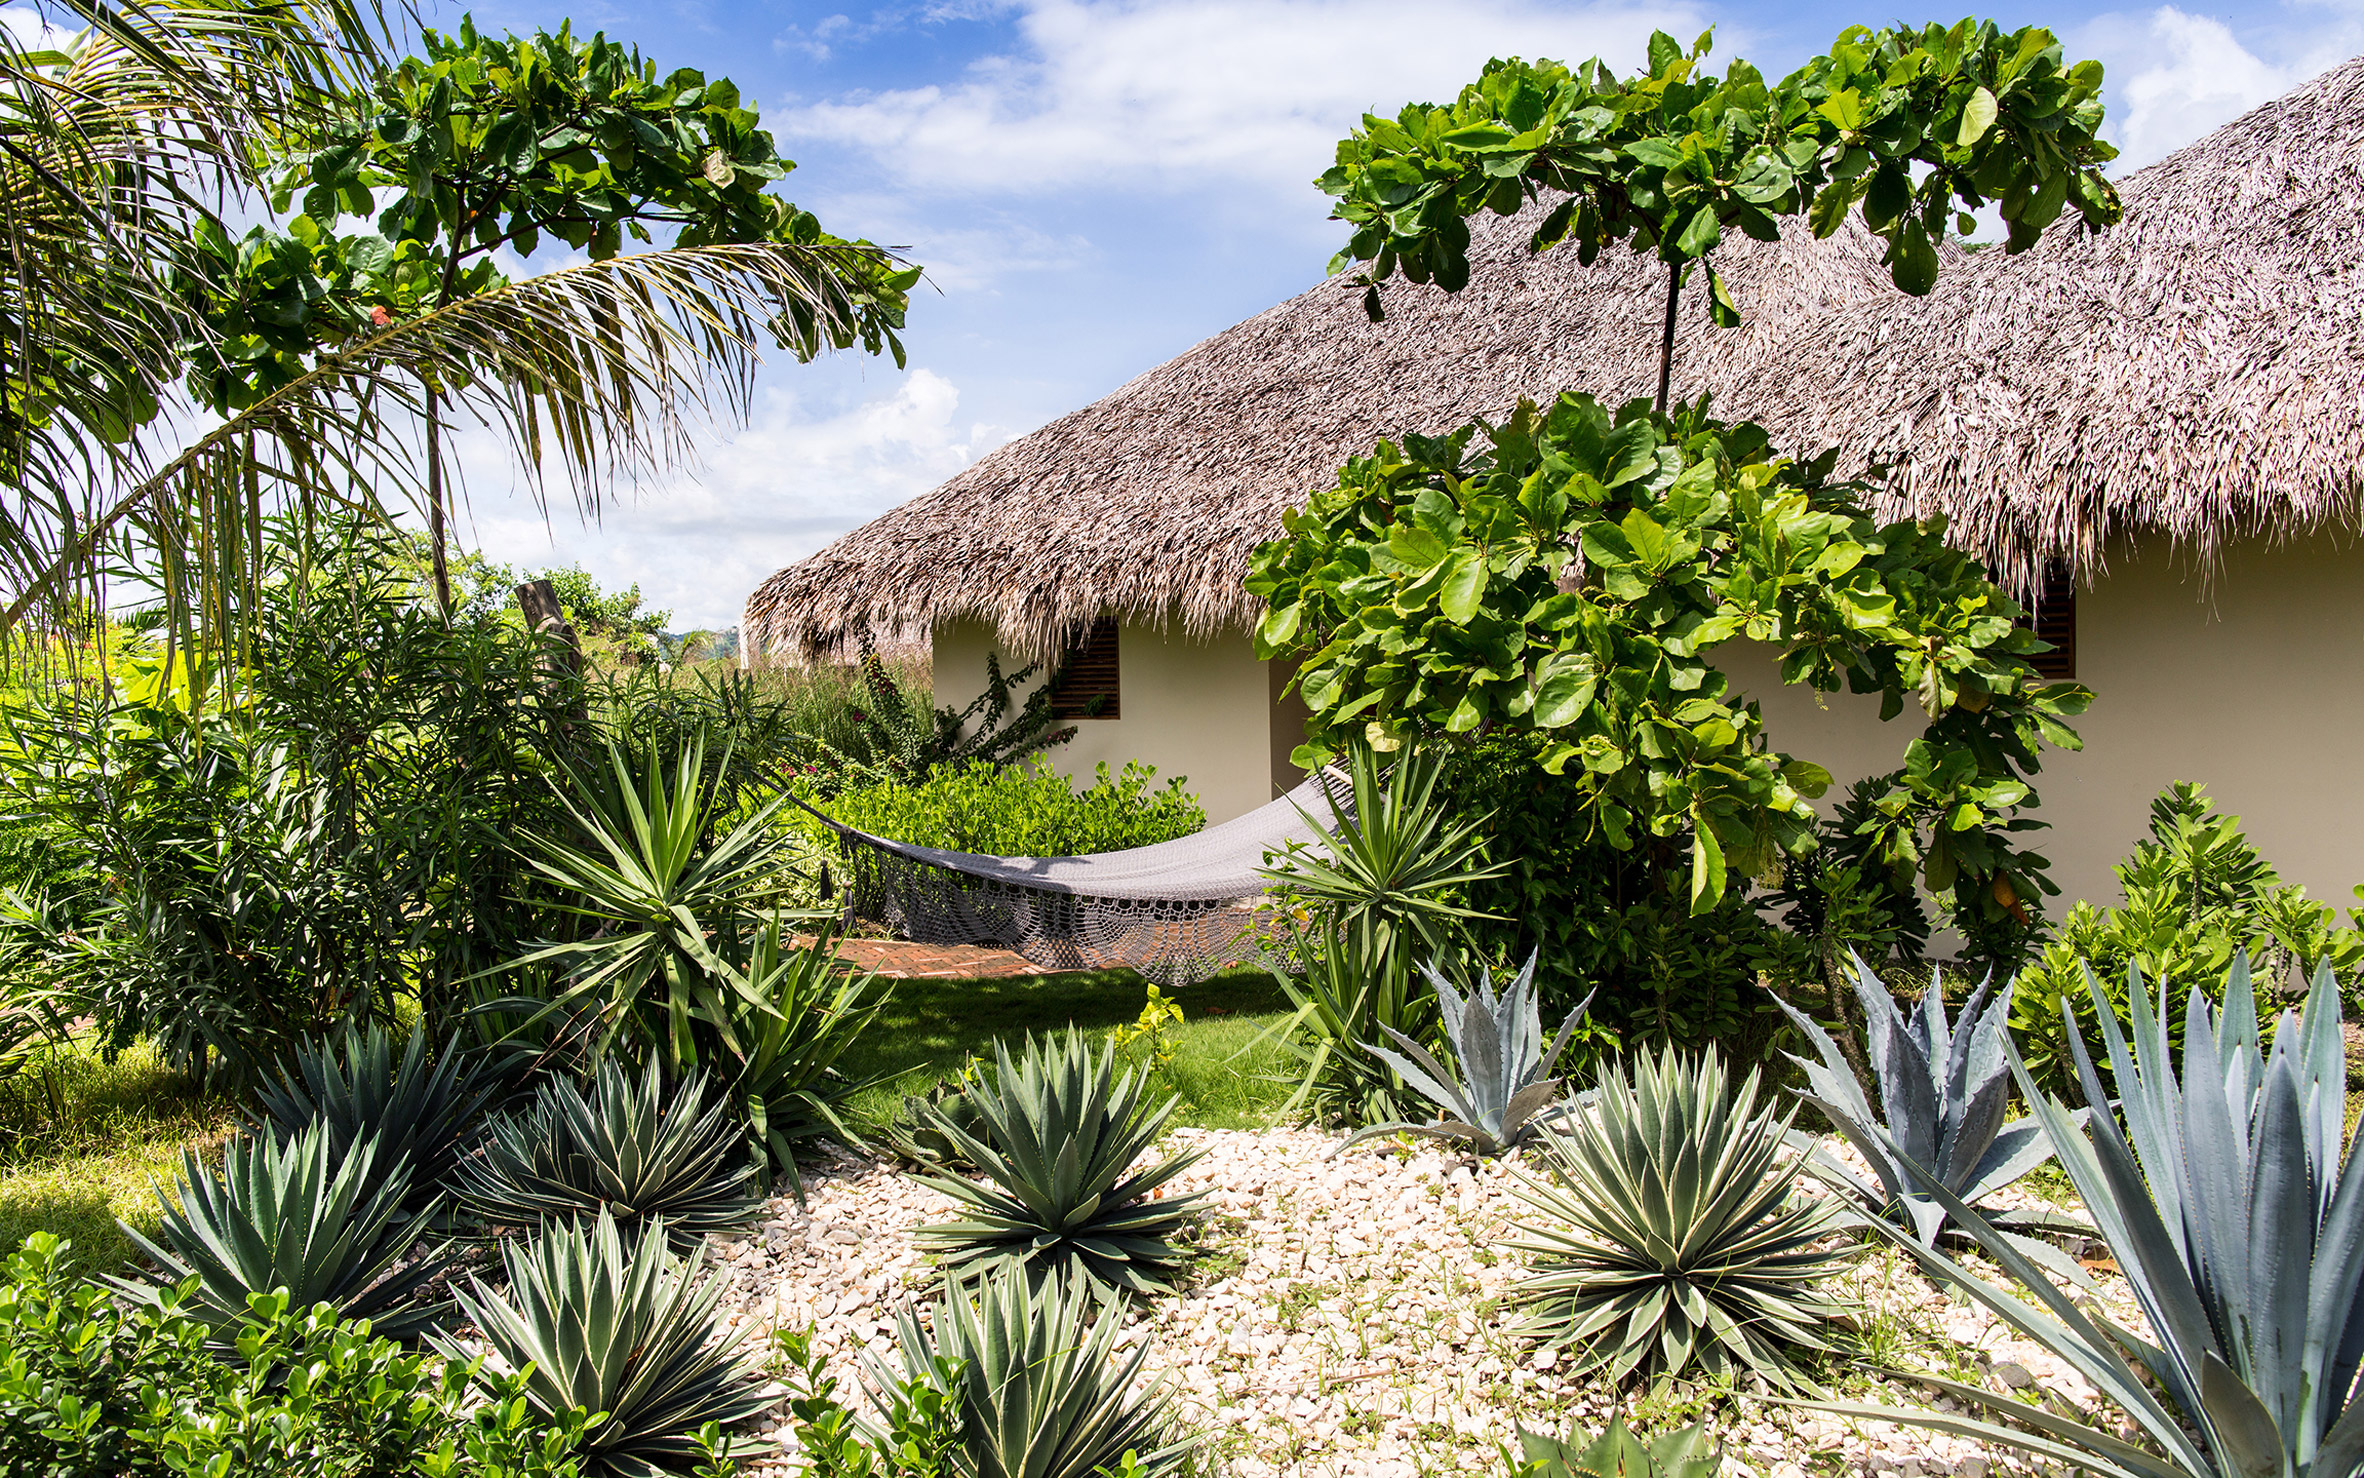 Meson Nadi Boutique Hotel, Design Hotel's first property in Nicaragua, was awarded in the Resort Hotel and Landscaping & Outdoor Spaces categories at the AHEAD Americas awards 2018